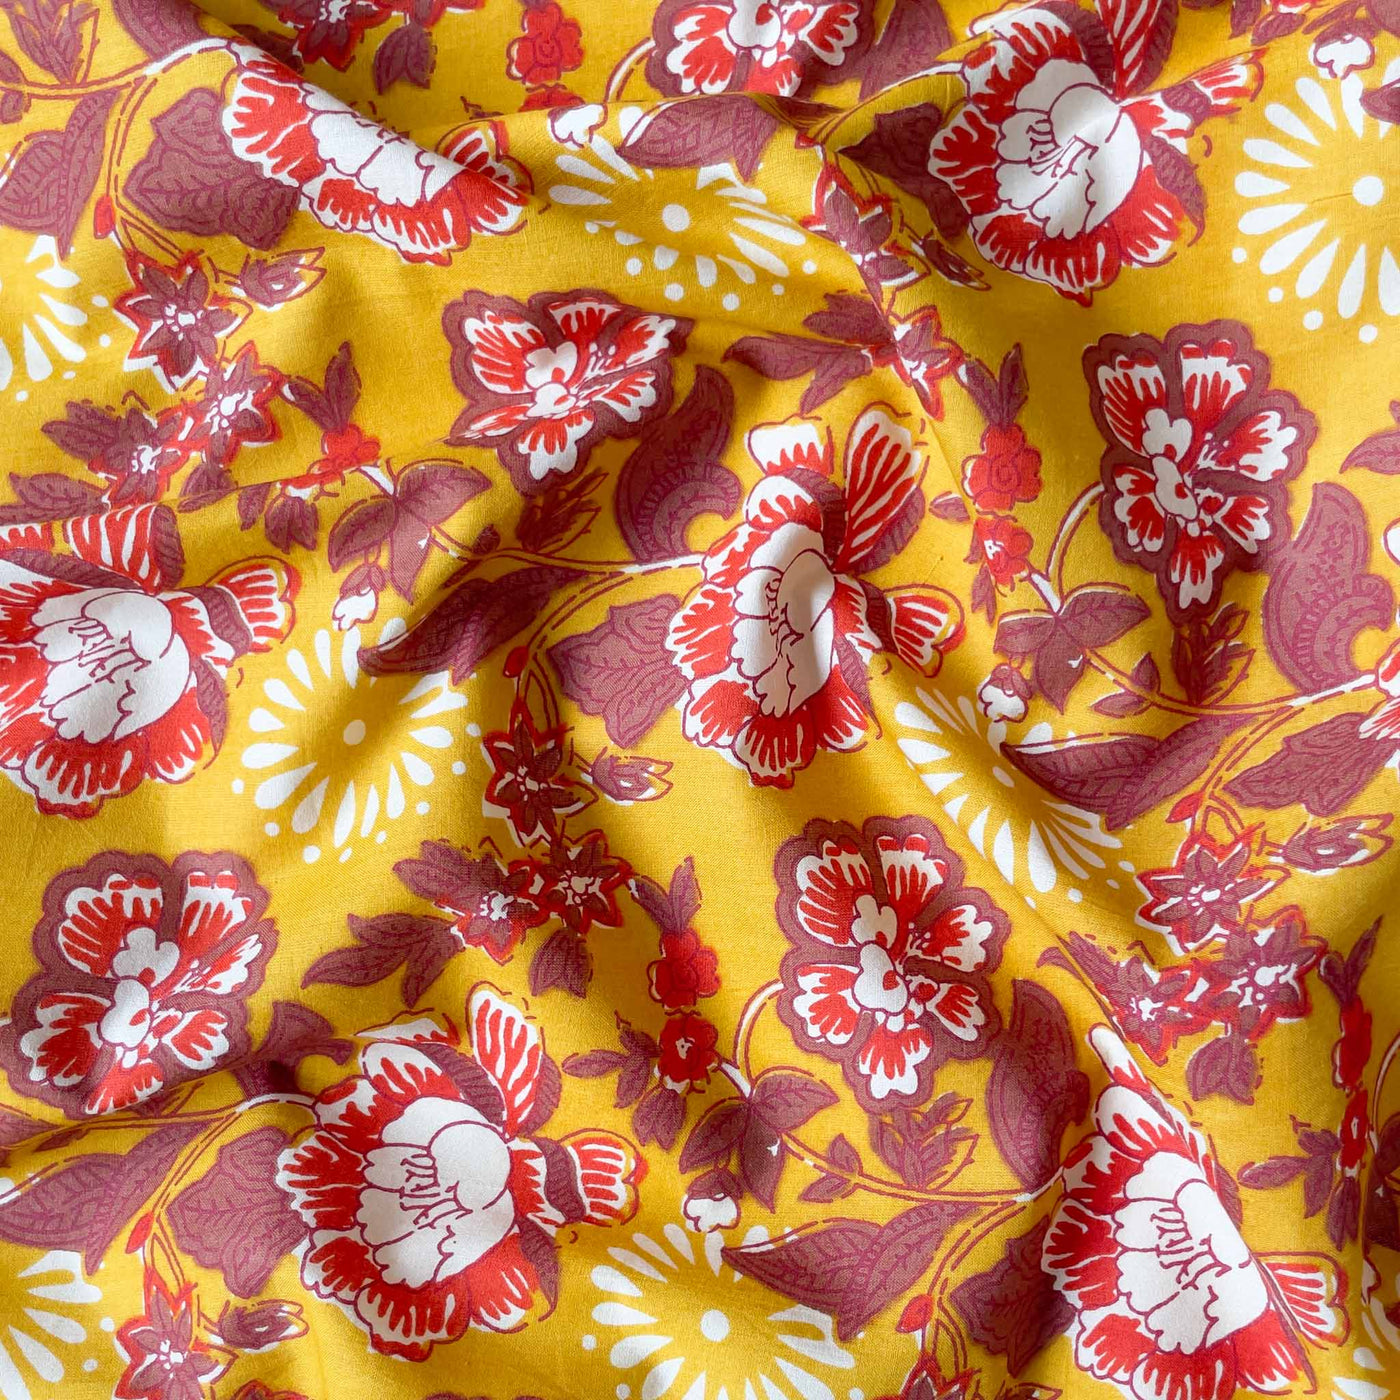 Screen Printed Cotton Fabric Cut Piece (CUT PIECE) Mustard Yellow & Brown Abstract Floral Screen Printed Pure Cotton Fabric (Width 43 inches)